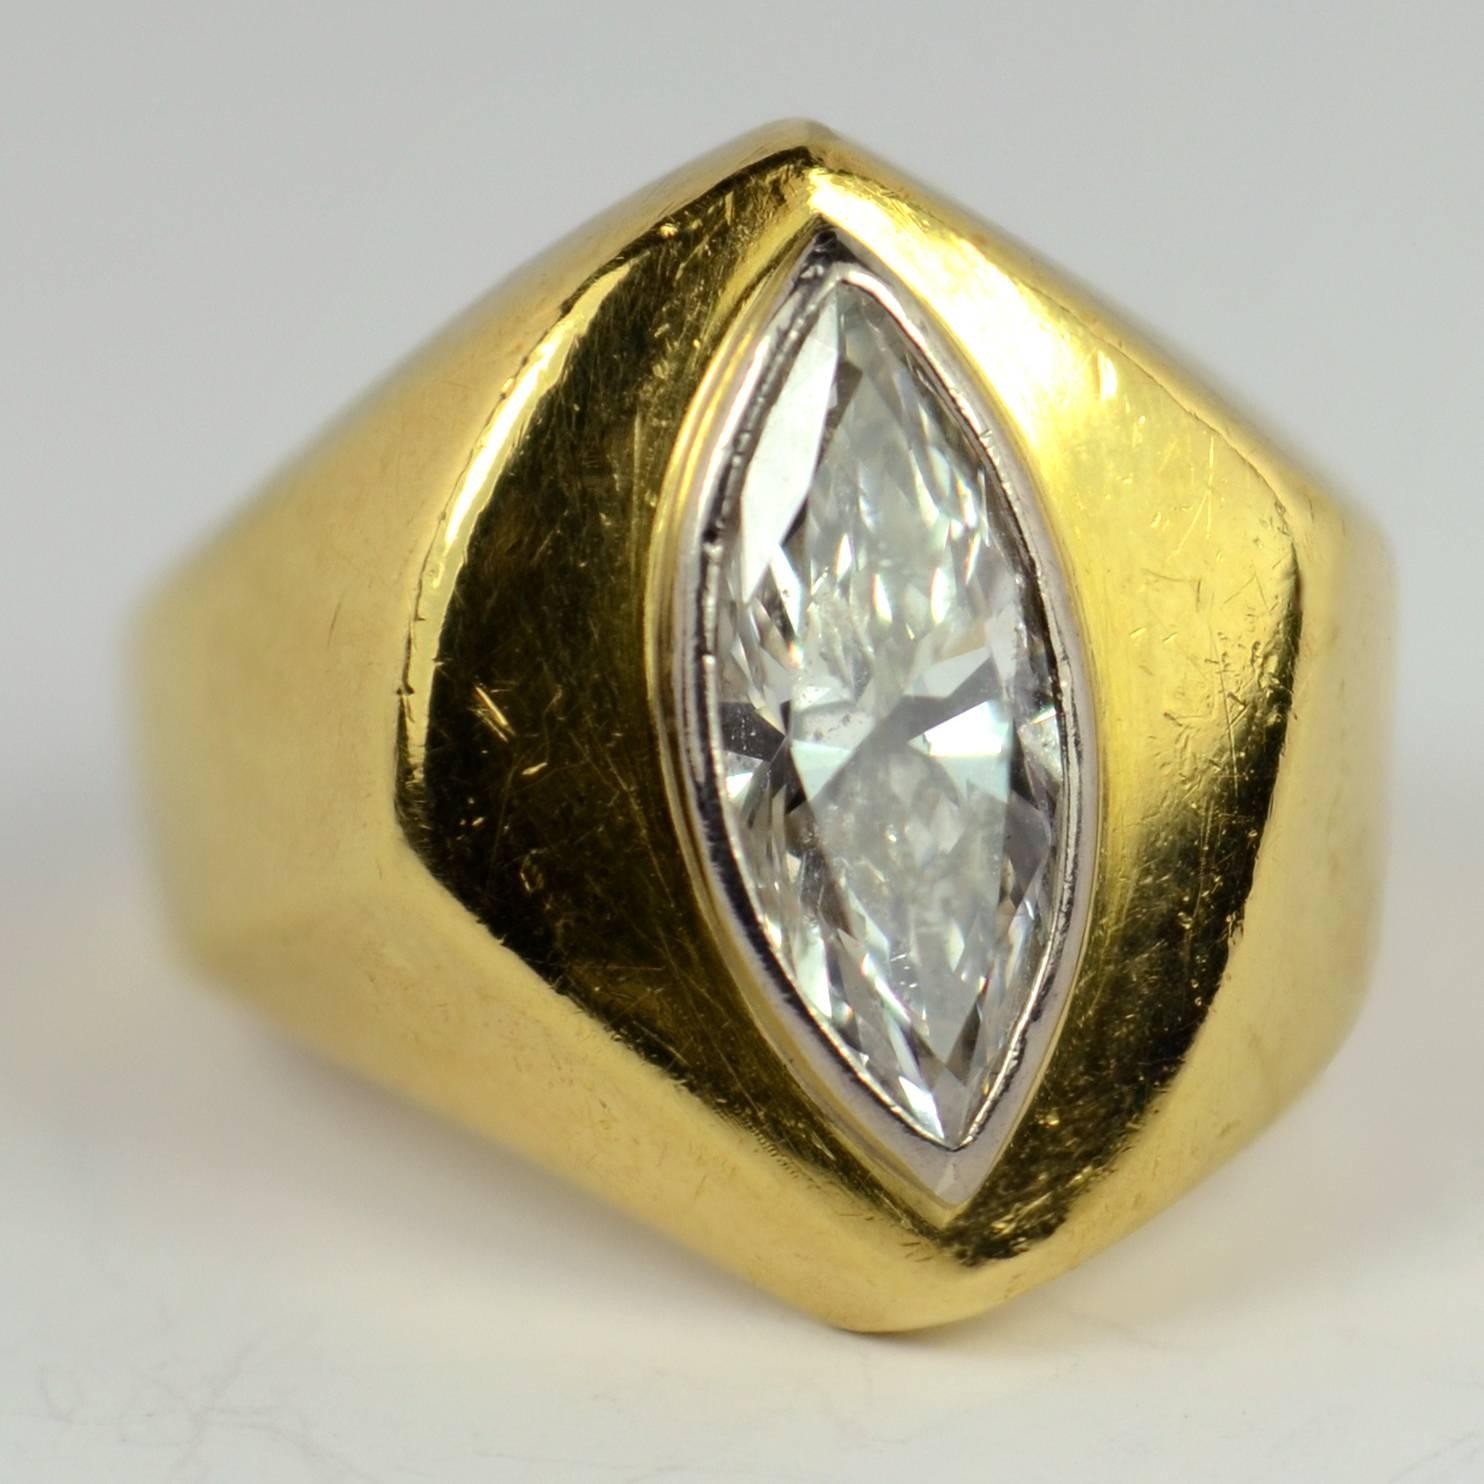 A stylish and original signet style ring set with a colourless marquise brilliant cut diamond with an approximate weight of 2.25 carat (estimated). 

Stamped 18K for 18 karat gold and American manufacture and signed Fretz.

Ring size: N.5 (US size